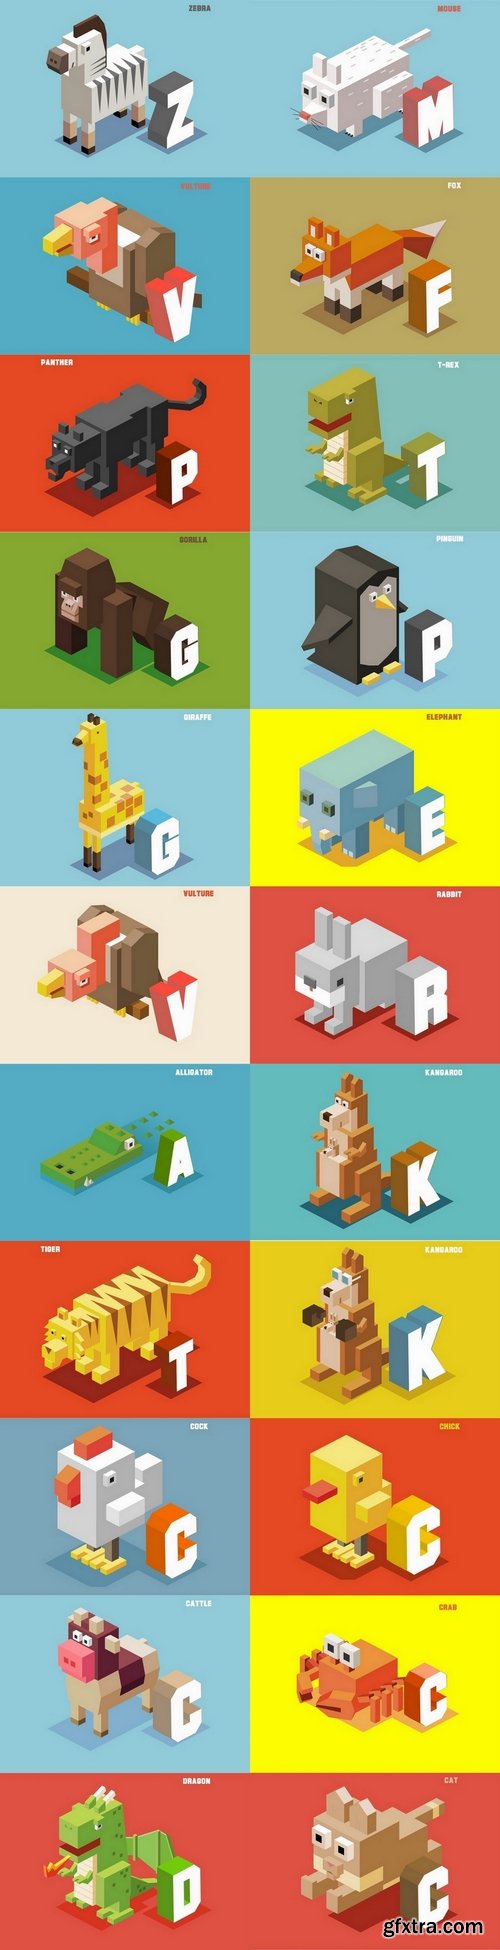 Low Poly Isometric Animal Alphabet Collection